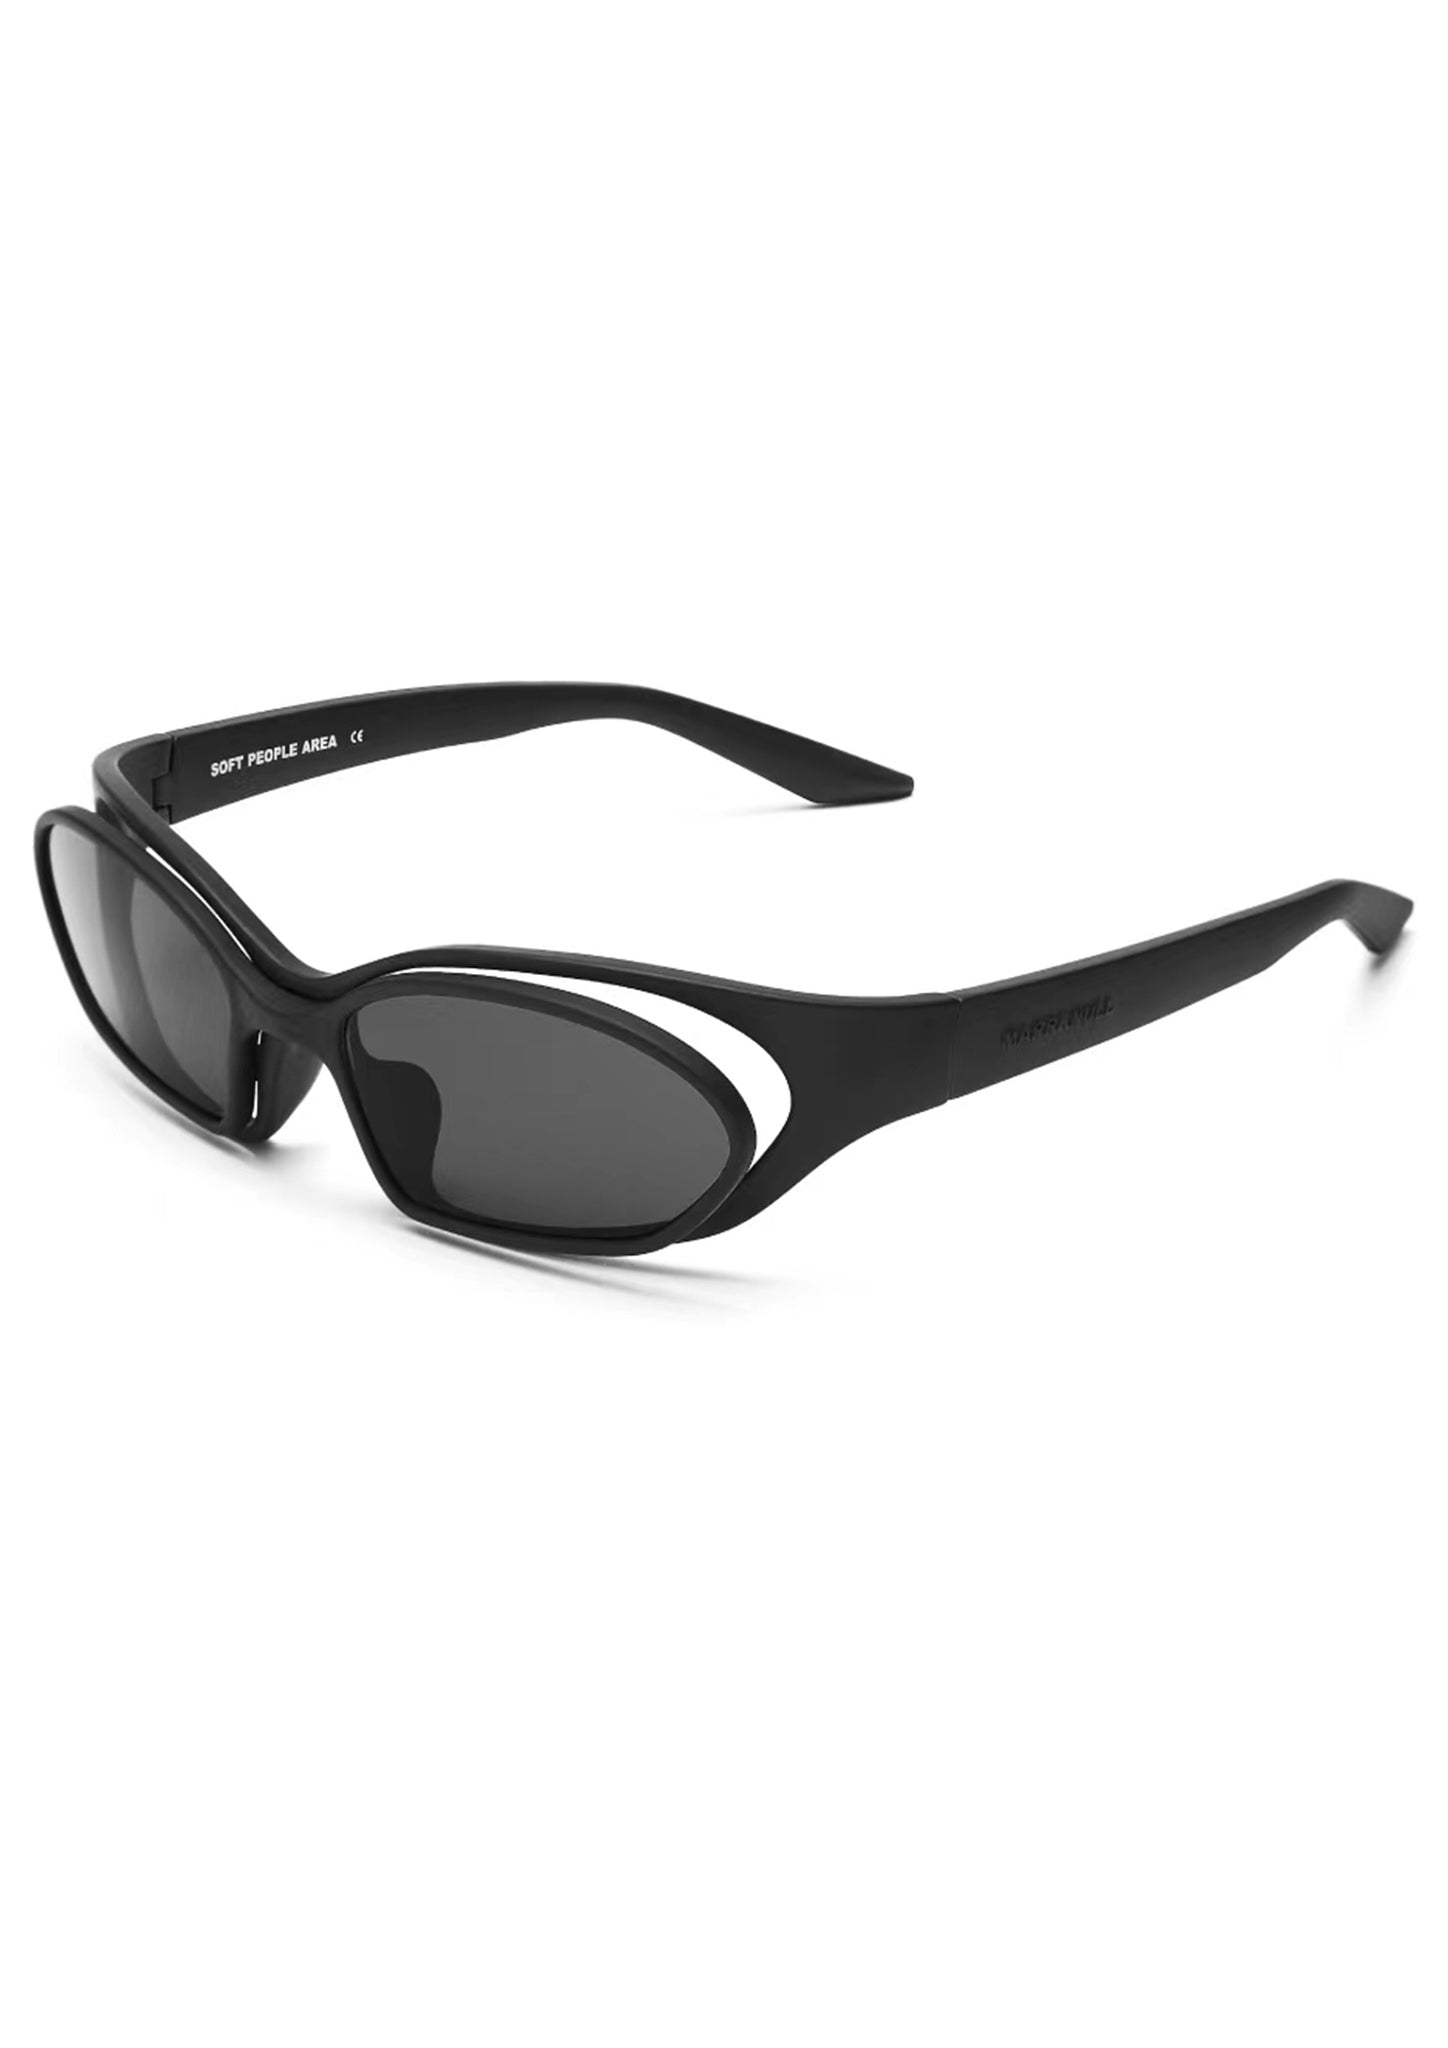 SOFT PEOPLE AREA JOINTLY-DESIGNED DOUBLE RIM SUNGLASSES BLACK